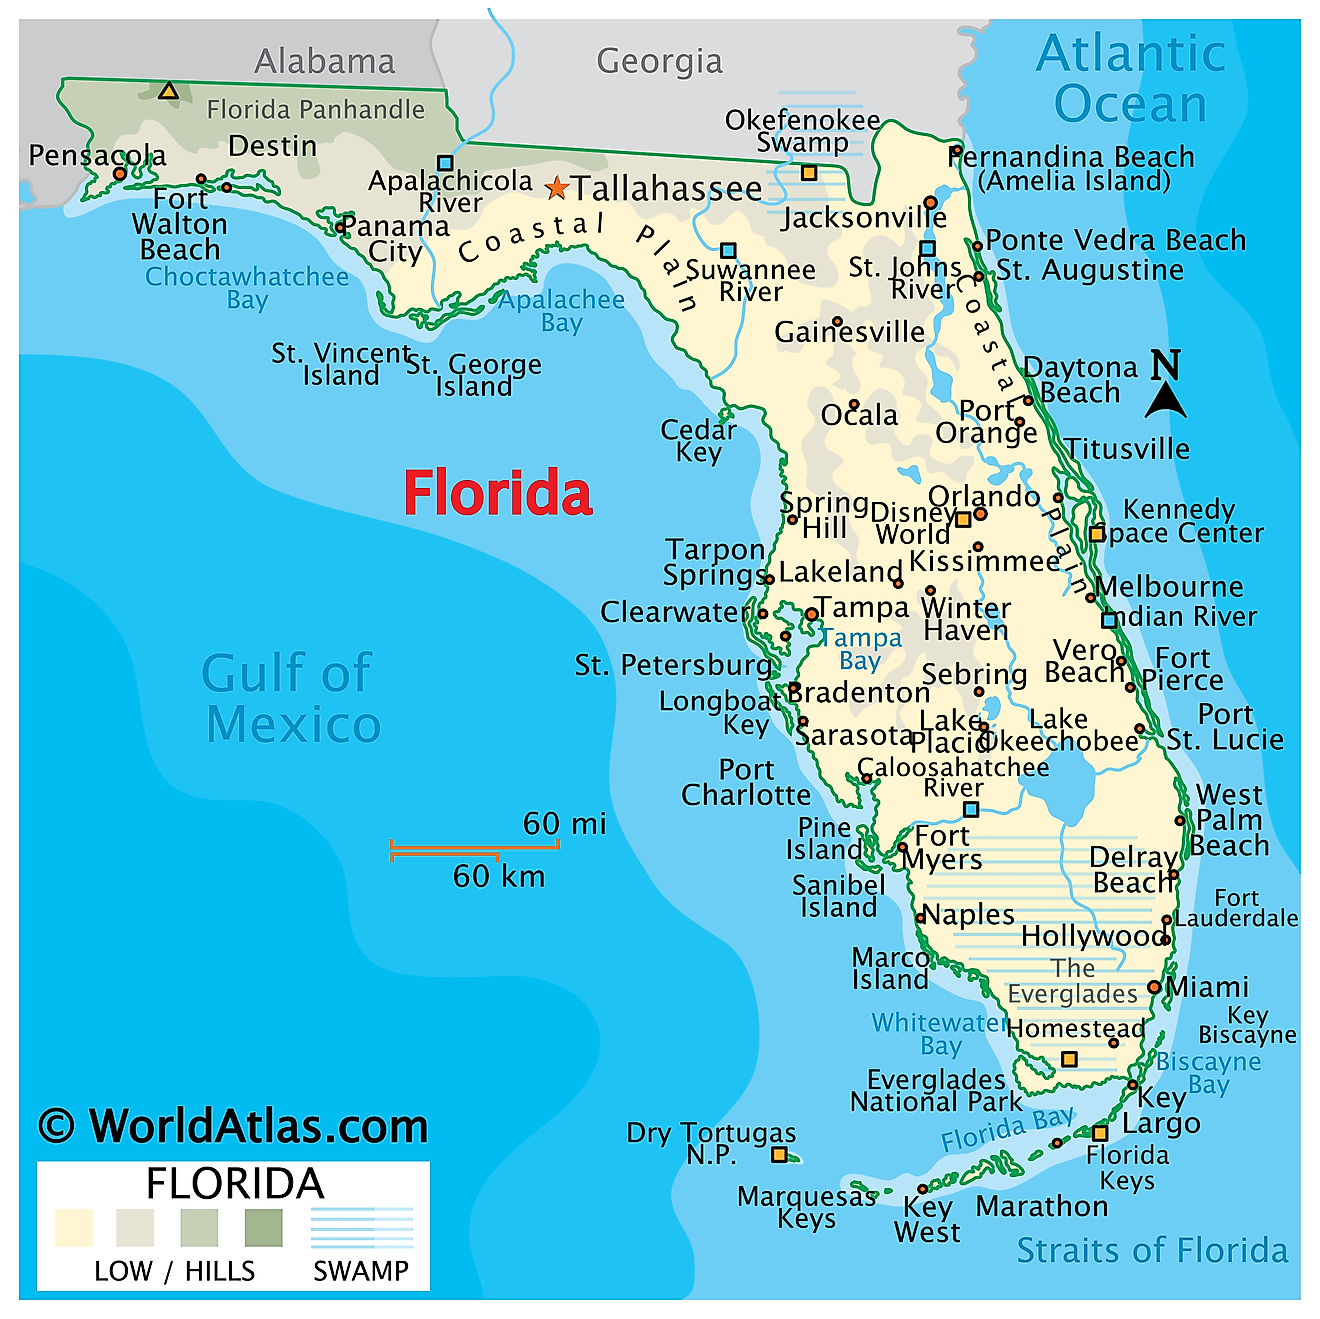 Where Is The Florida Peninsula Located On A Map - Crabtree Valley Mall Map